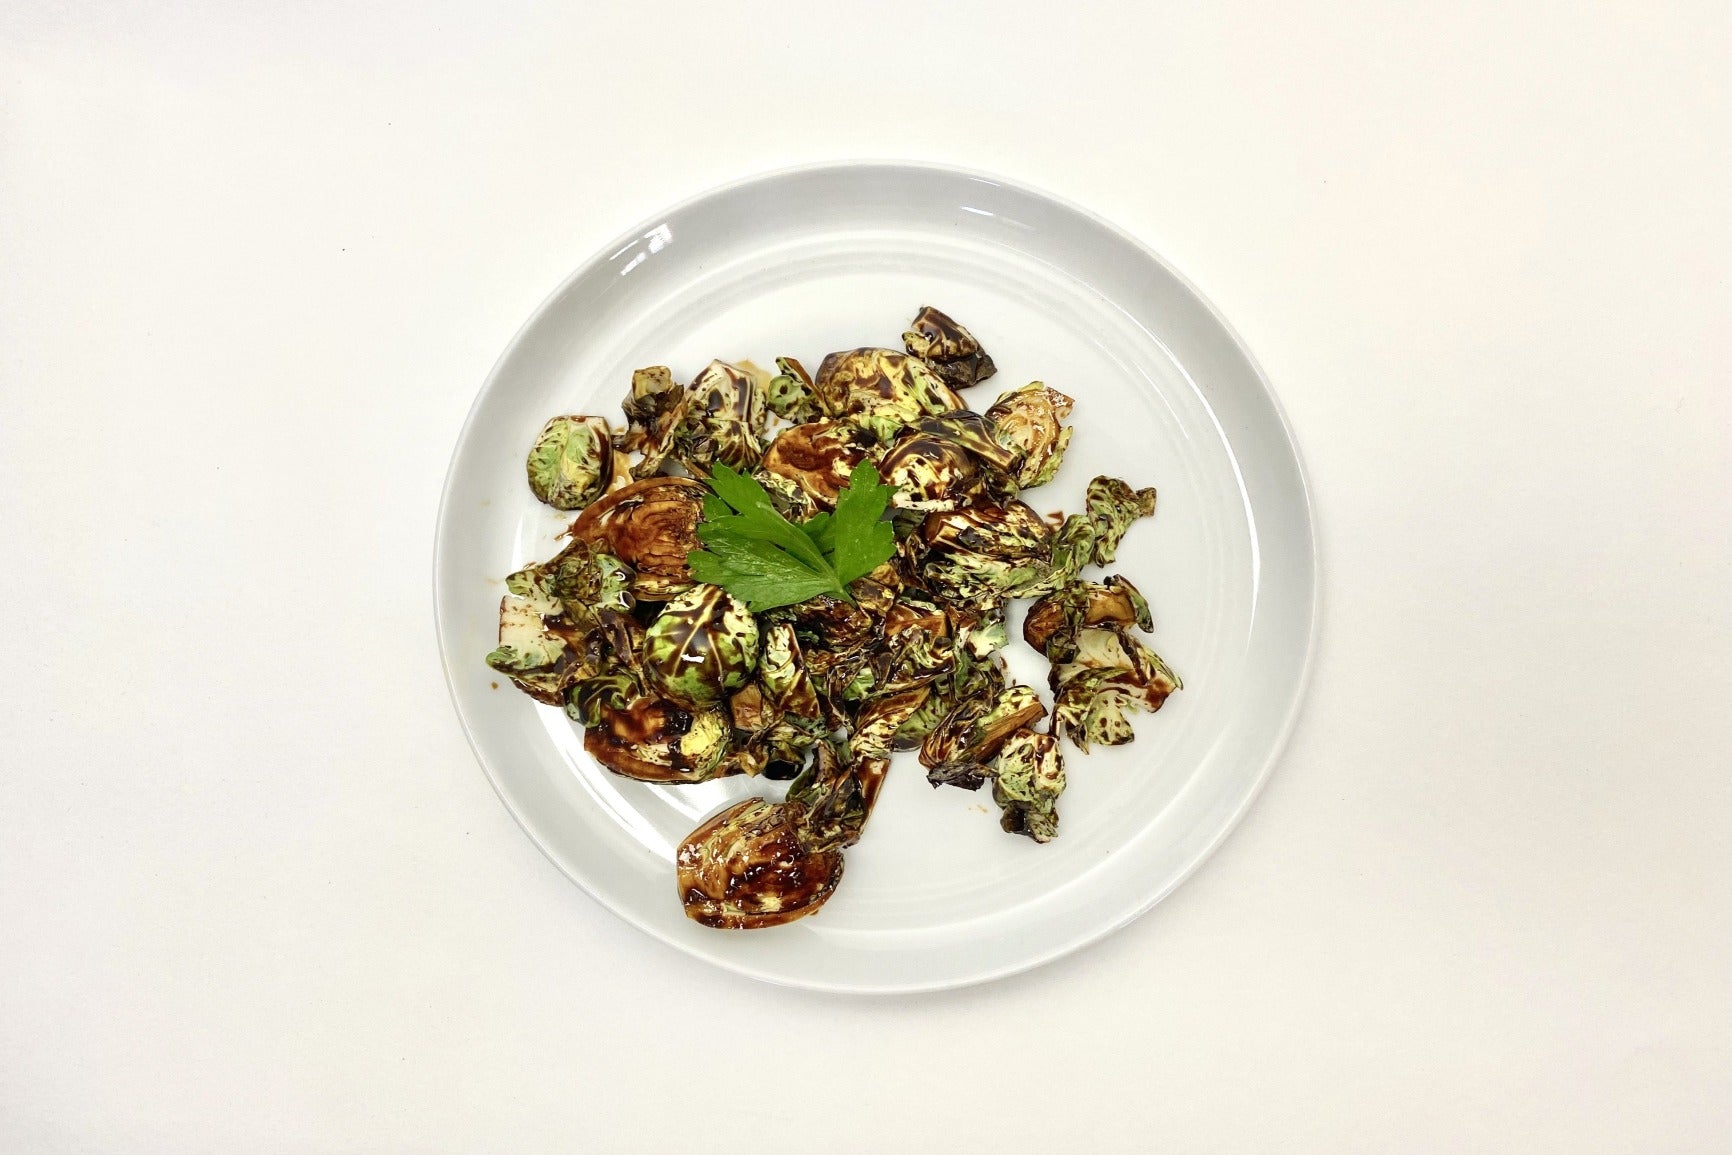 SIDE - Roasted Balsamic Brussels Sprouts